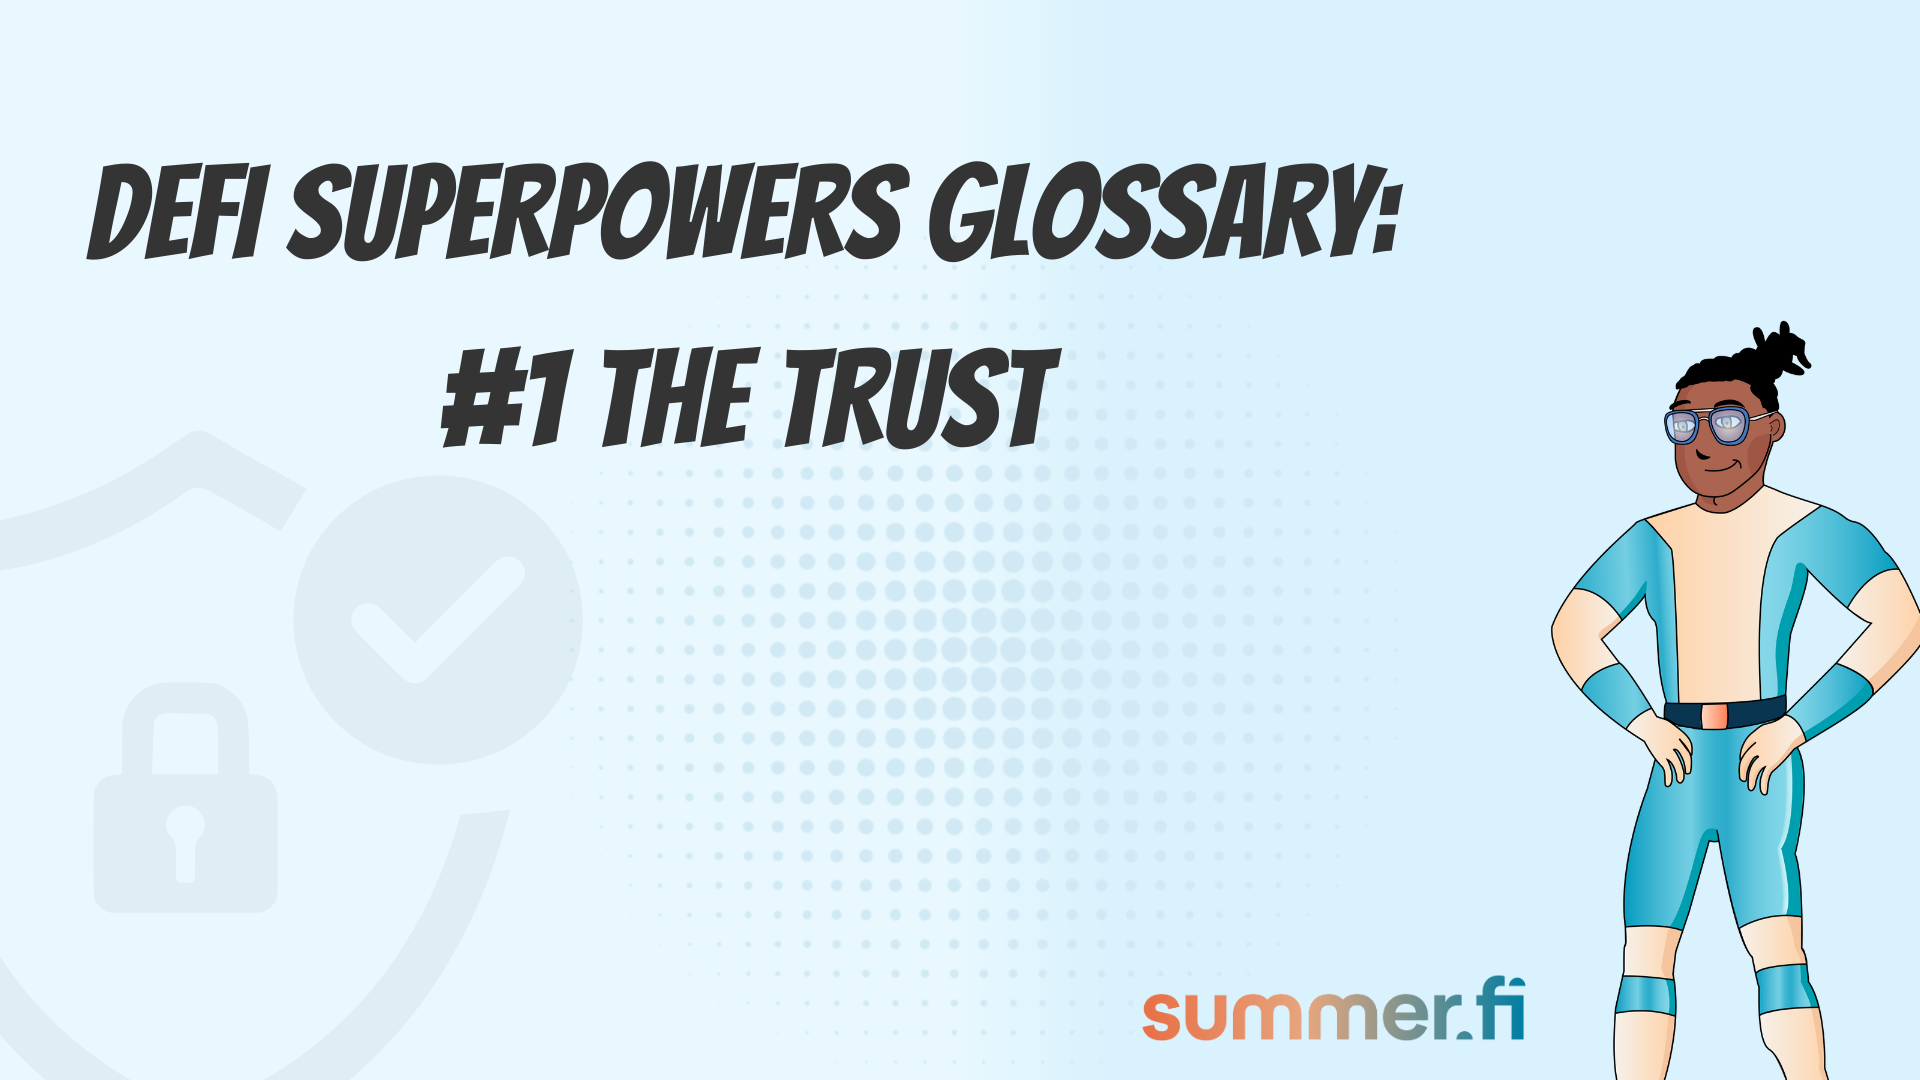 DeFi Superpowers Glossary: The Trust